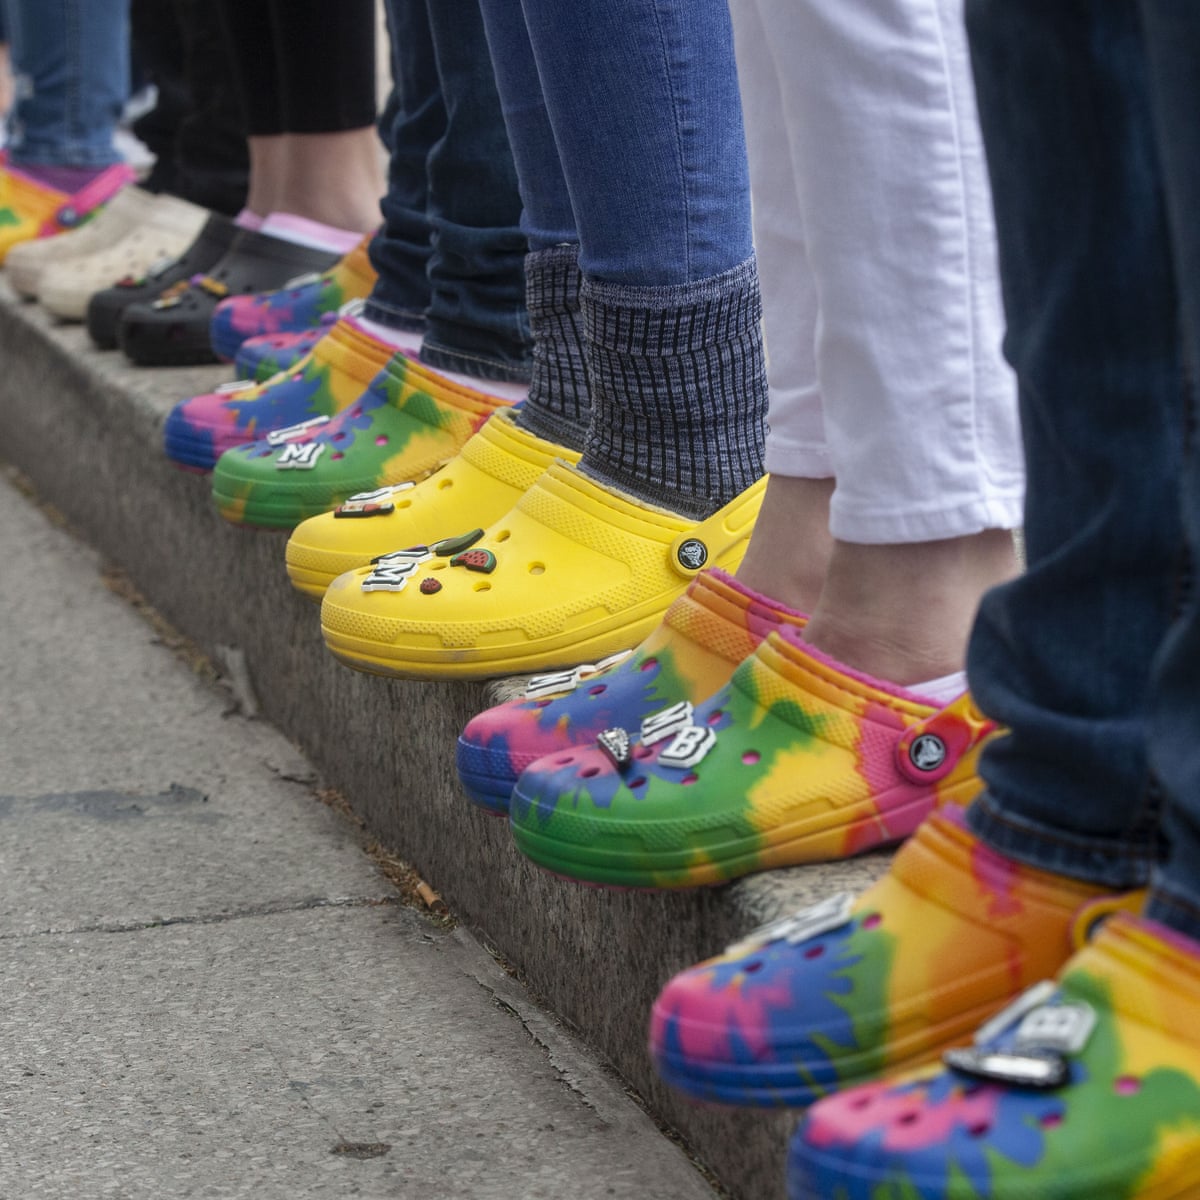 Crocs of gold: celebrity fans fuel frenzy to buy used 'ugly clogs